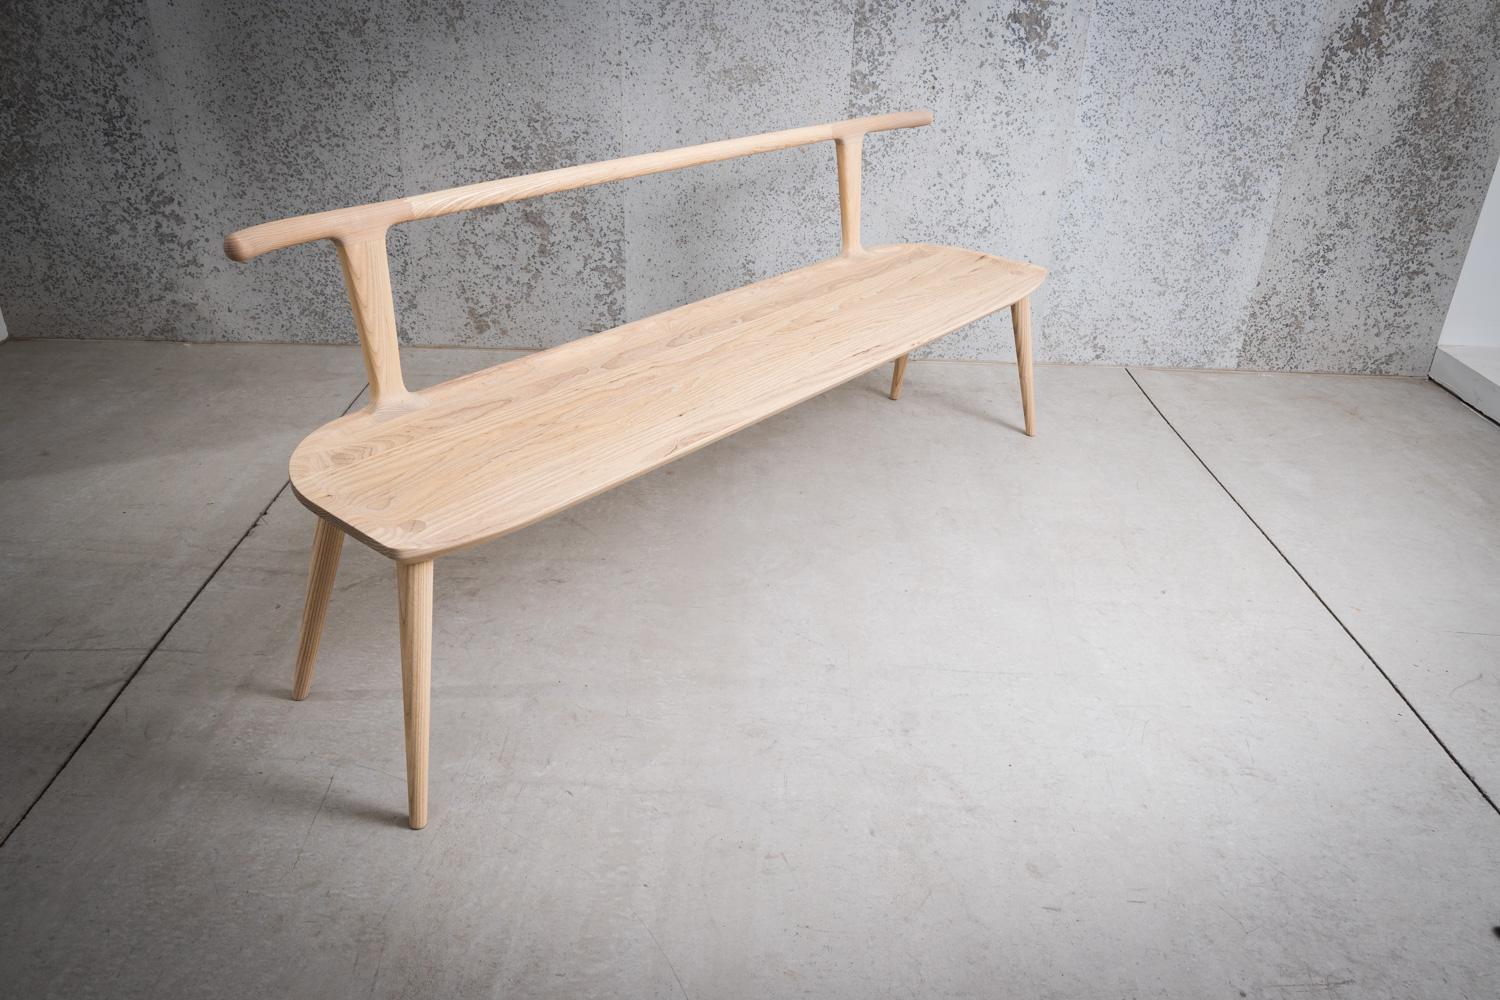 This entryway bench, designed by Justin Nelson for Fernweh Woodworking, evolved out of the Oxbend dining chair, leading also to a matching bar stool. The Oxbend Collection was born from a desire to create seating that is comfortable, organic, and